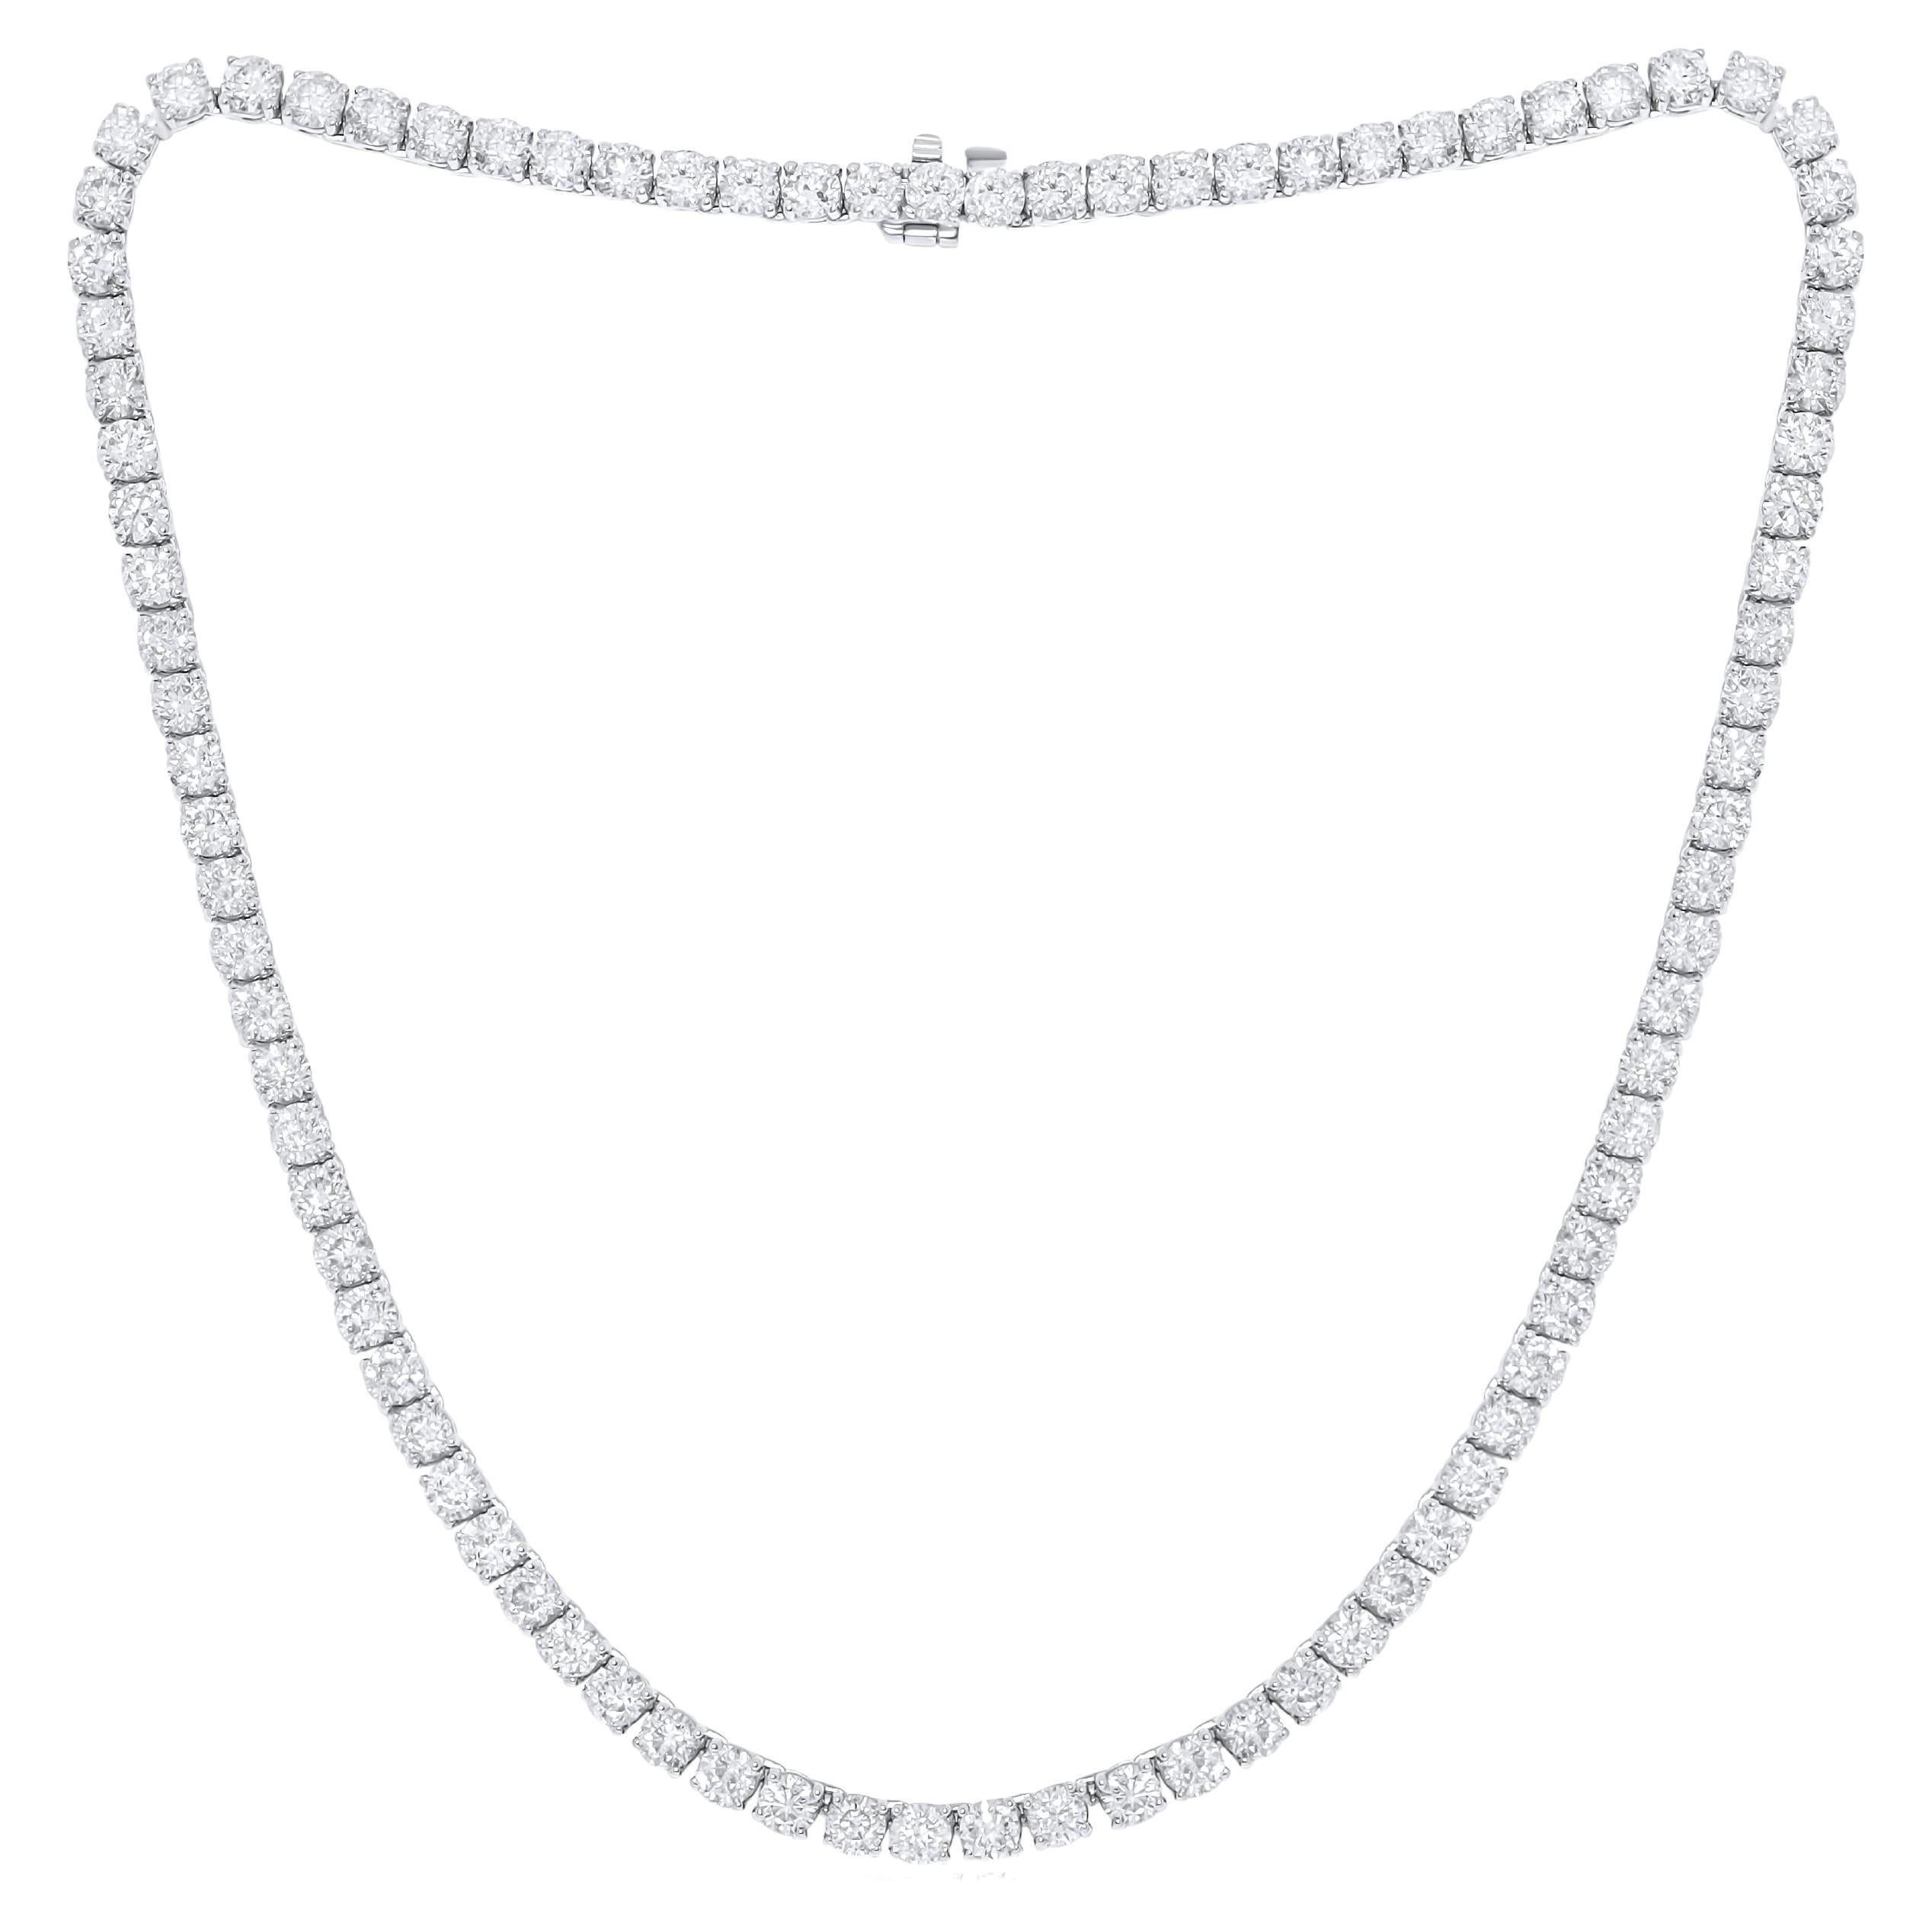 Diana M. 18 kt white gold, 16" 4 prong diamond tennis necklace  with 27cts